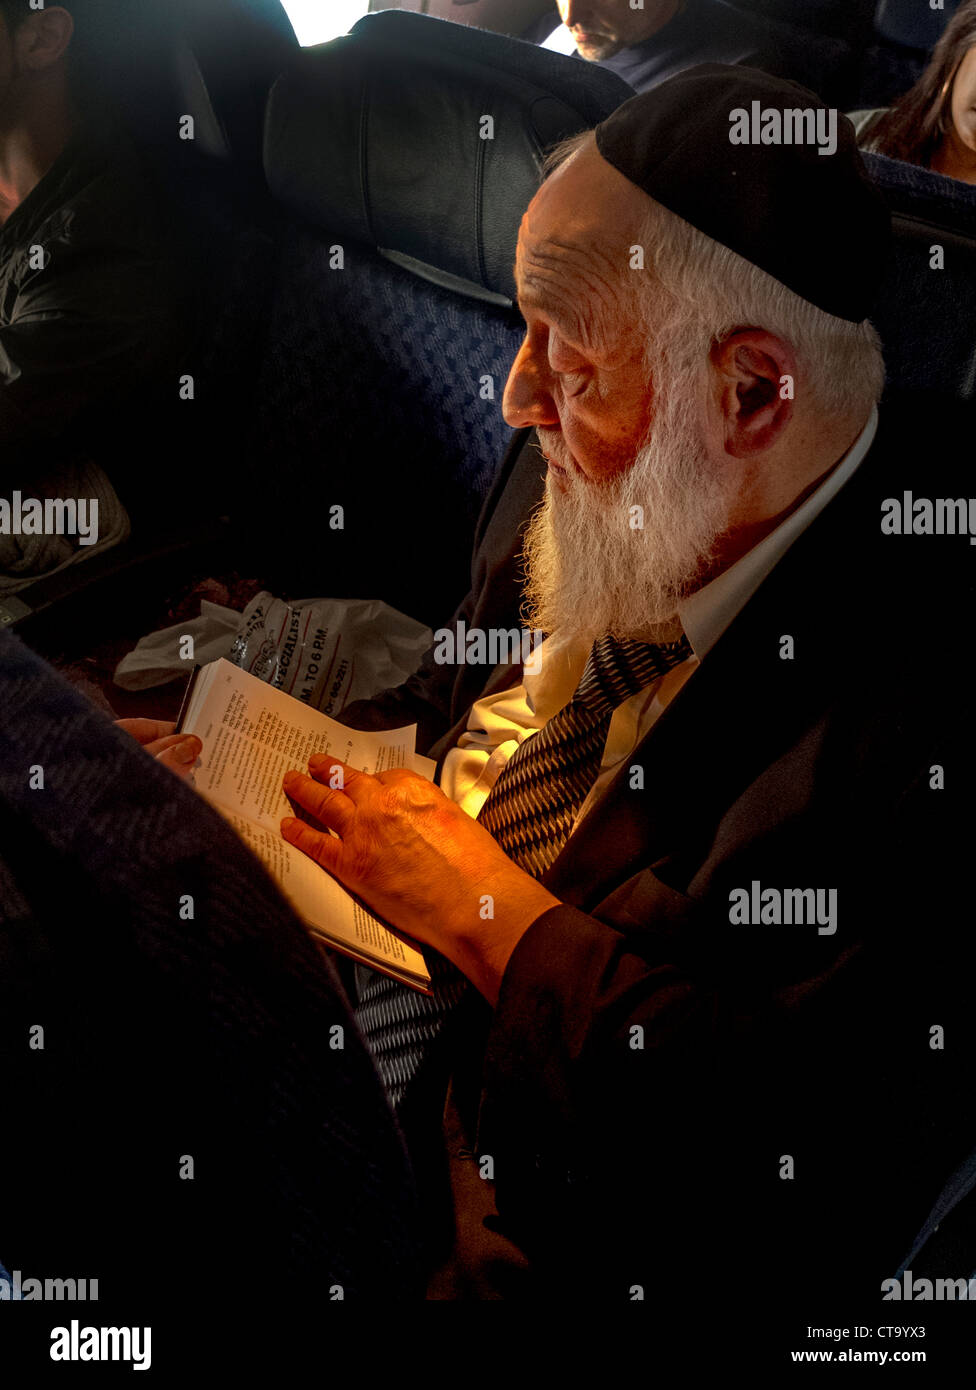 Wearing a yarmulke skull cap, an bearded Orthodox Jew reads from a book in Hebrew on an airliner while passengers sleep. Stock Photo